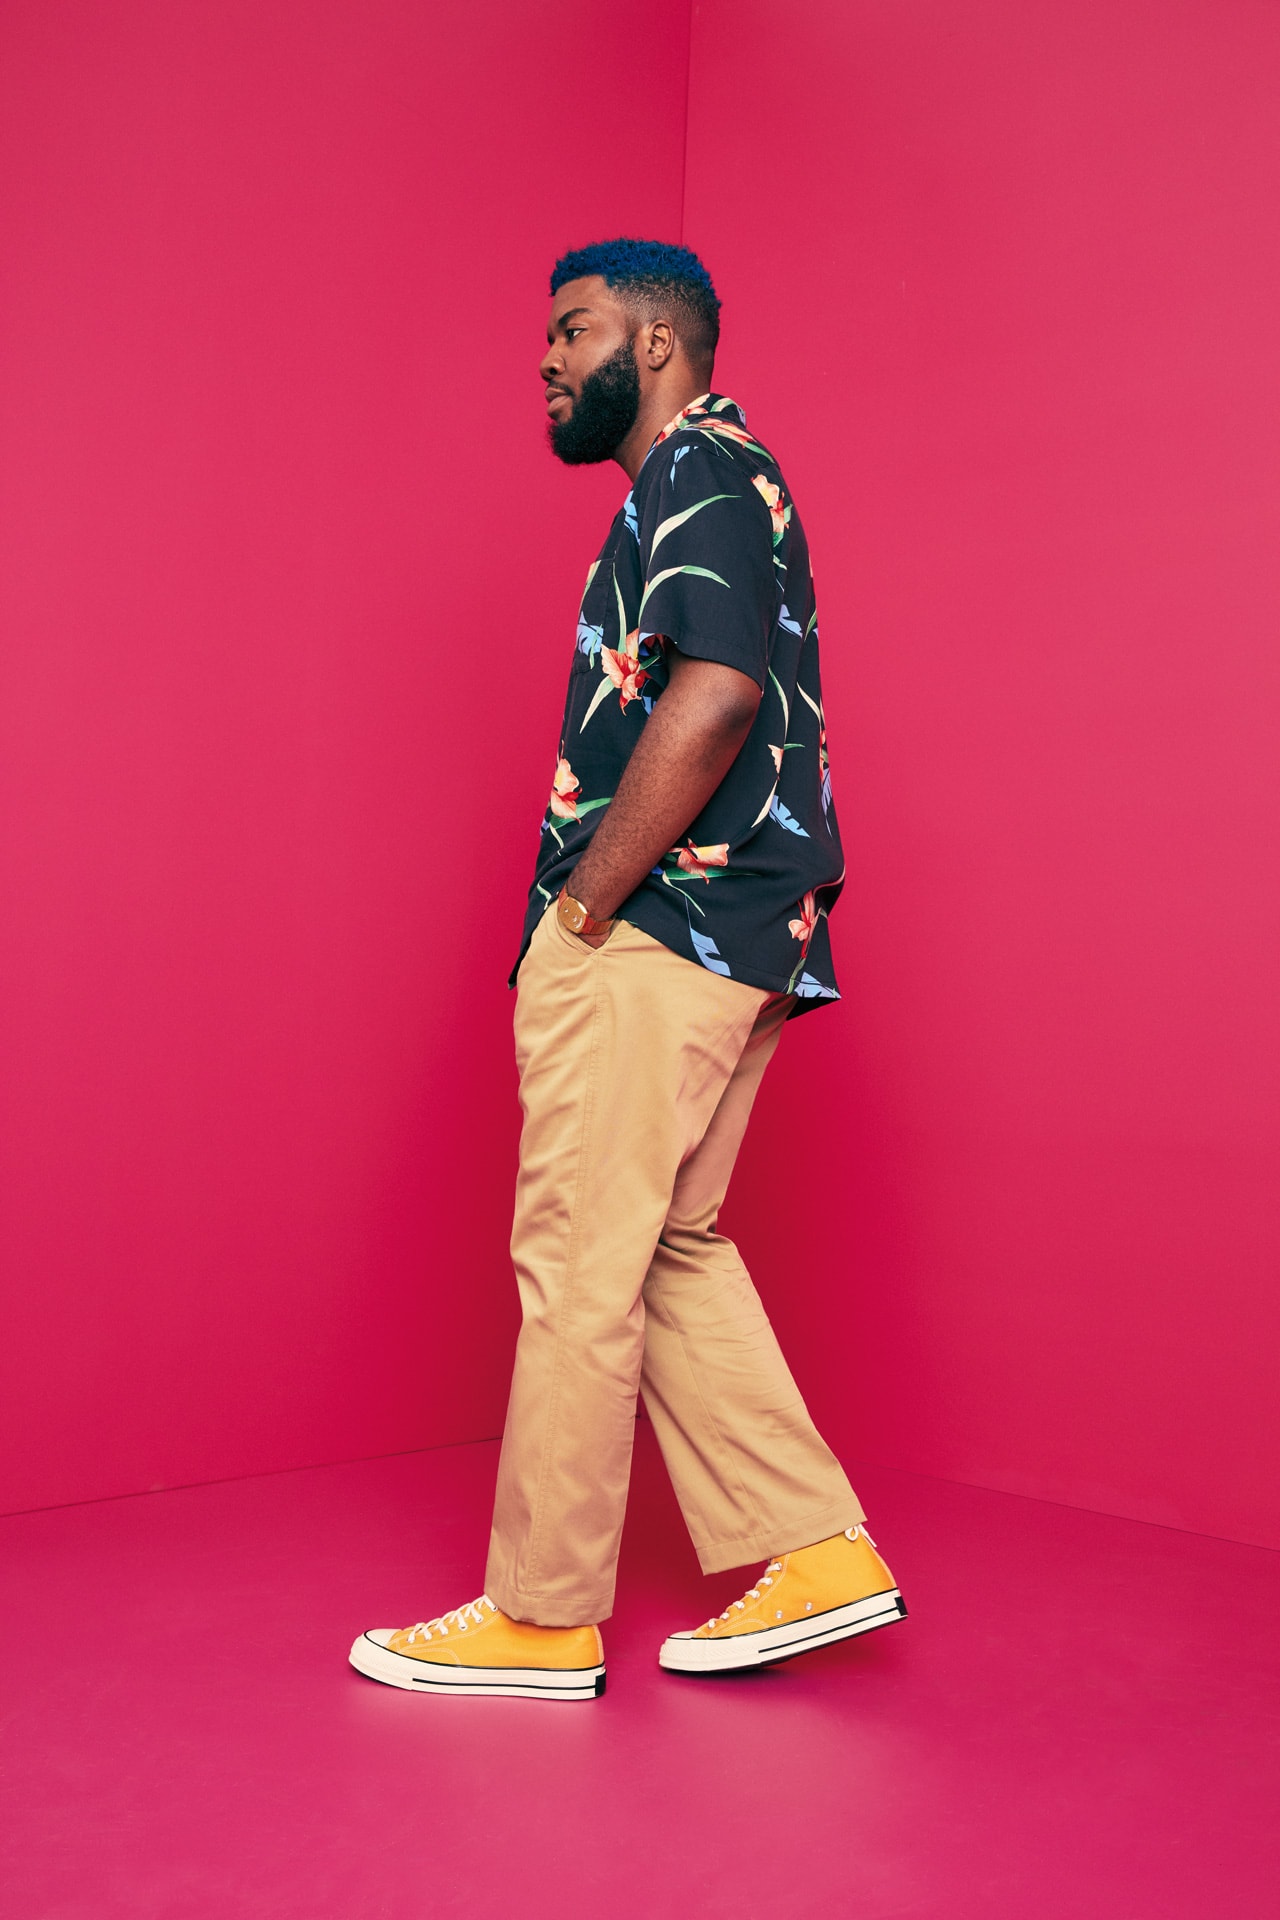 Levi's XX Chino Levi's Haus Miami With Khalid Standard Taper Slim Taper and Straight Cropped pink and jade classic black olive green and navy casual look garment dyed